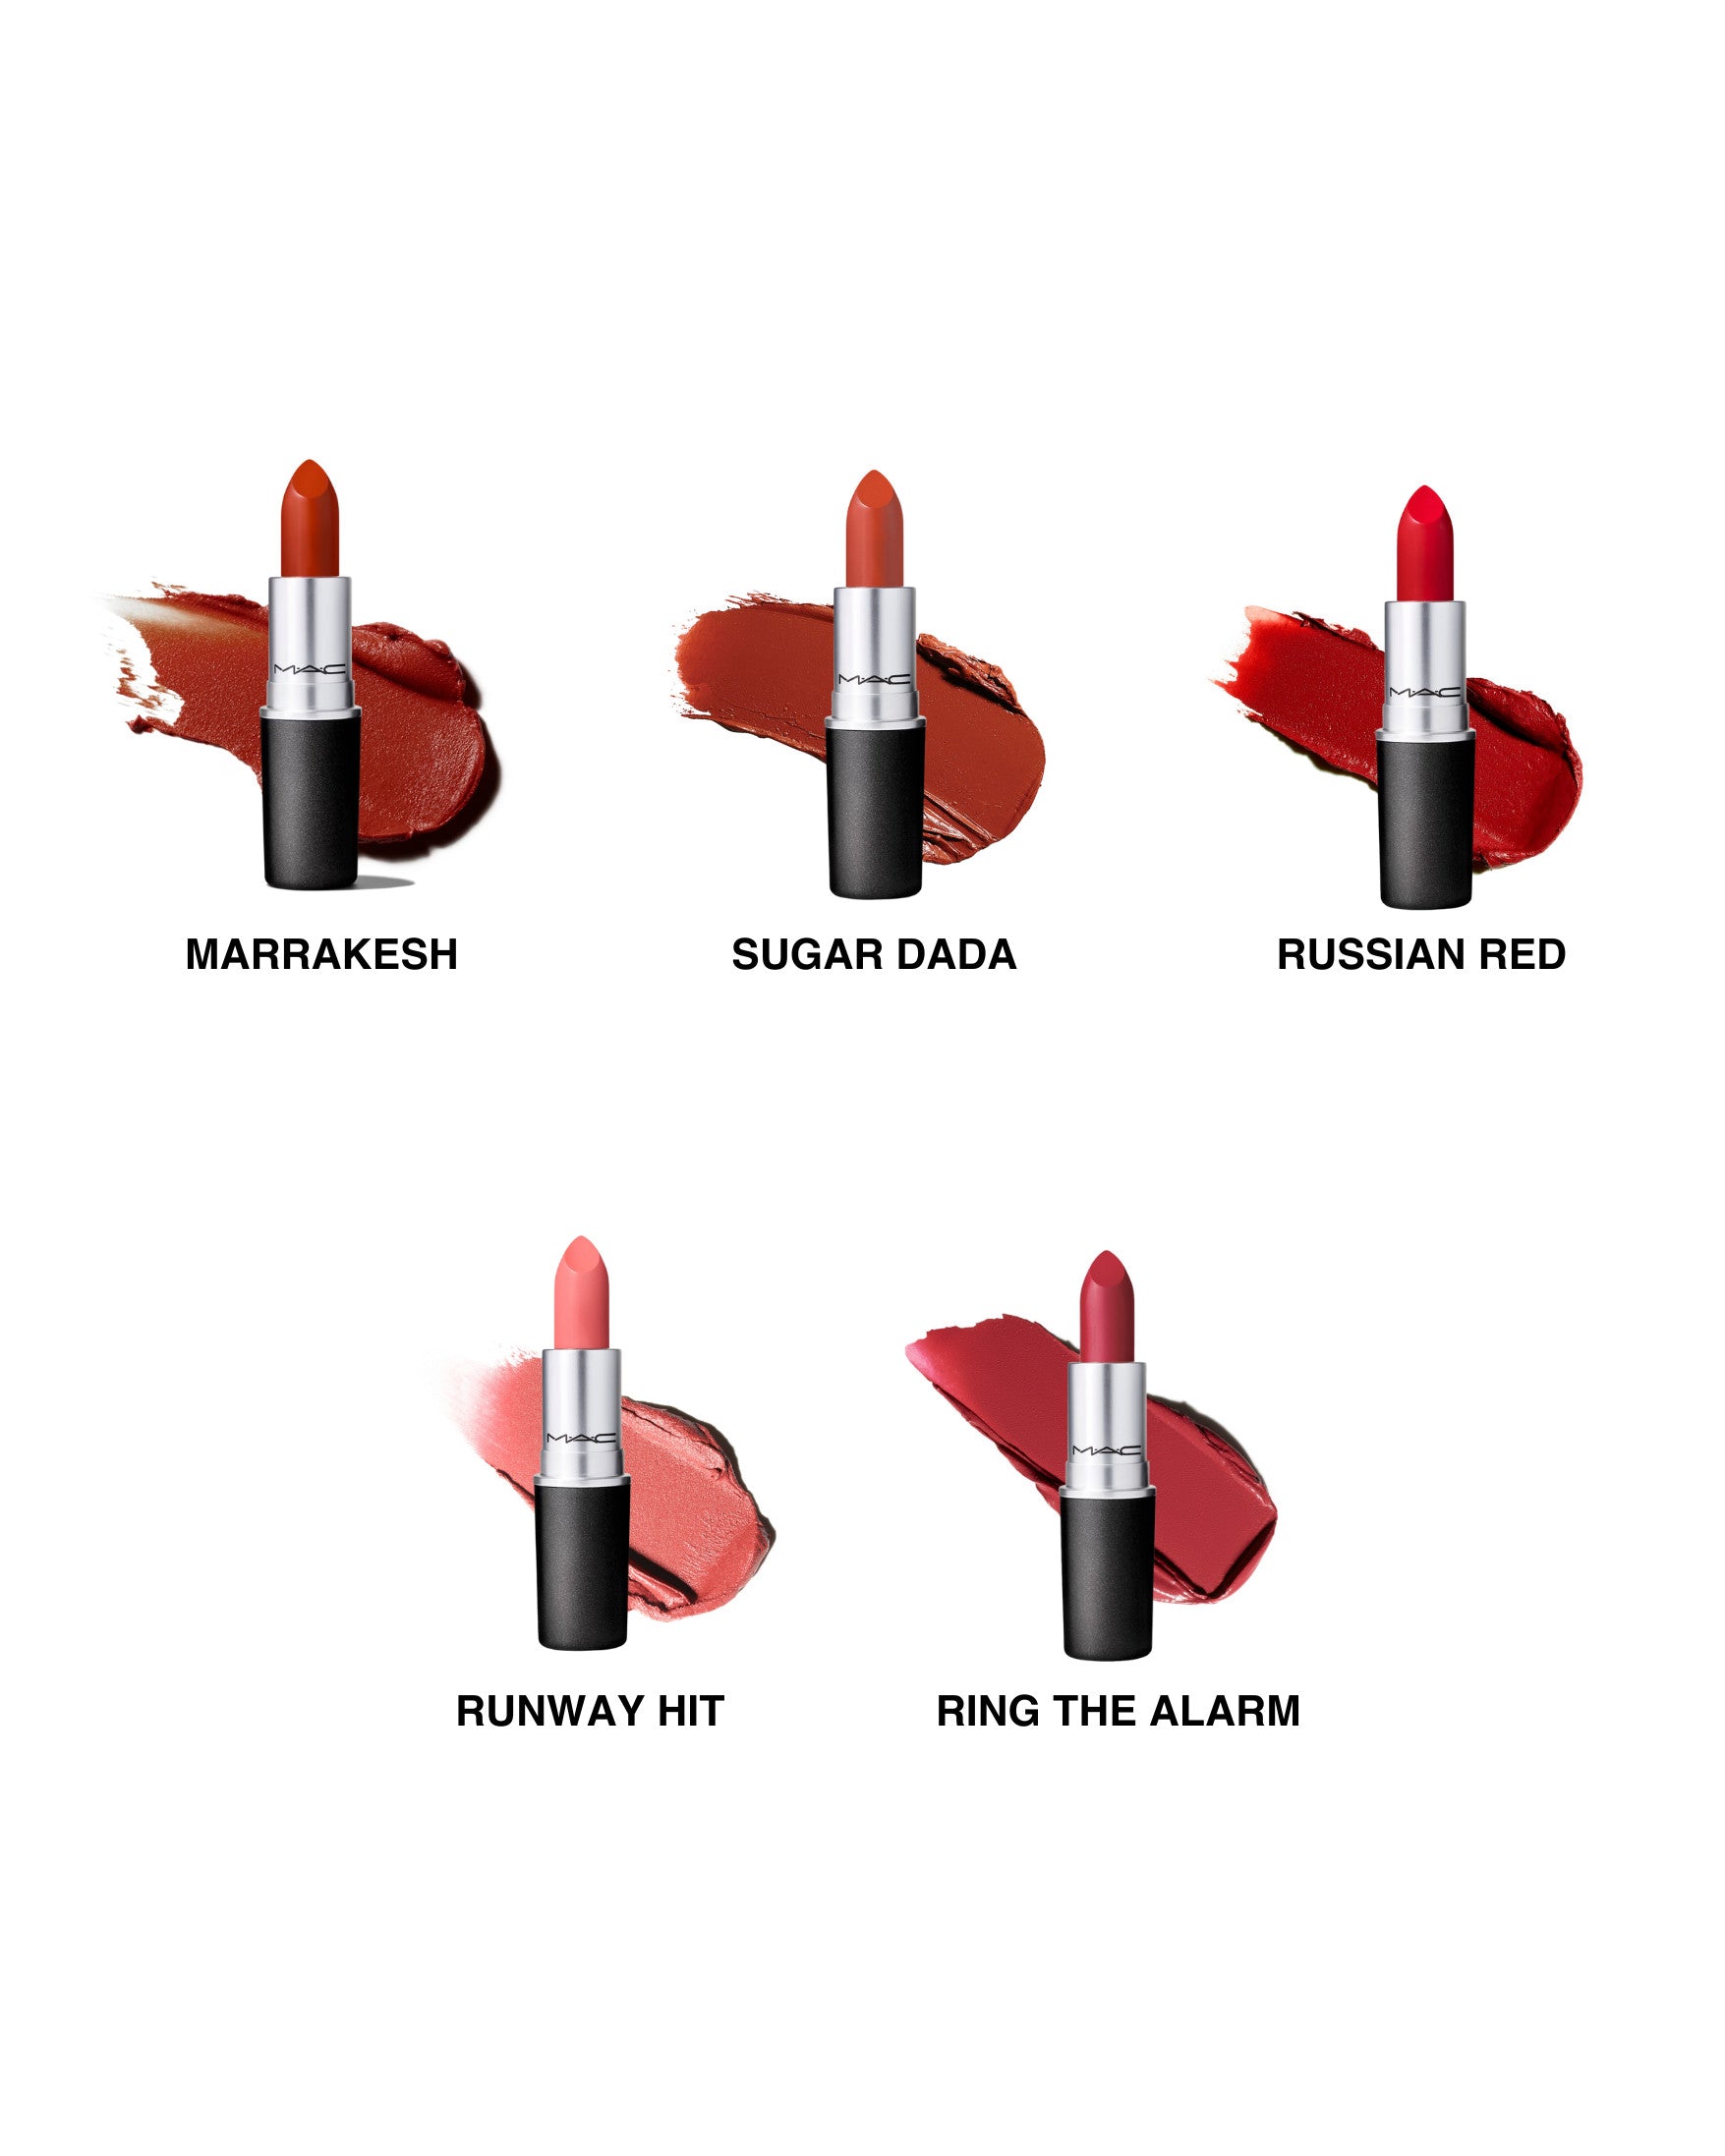 [GIFT] Non-commercial gift - MAC Lipstick valued 670K VND